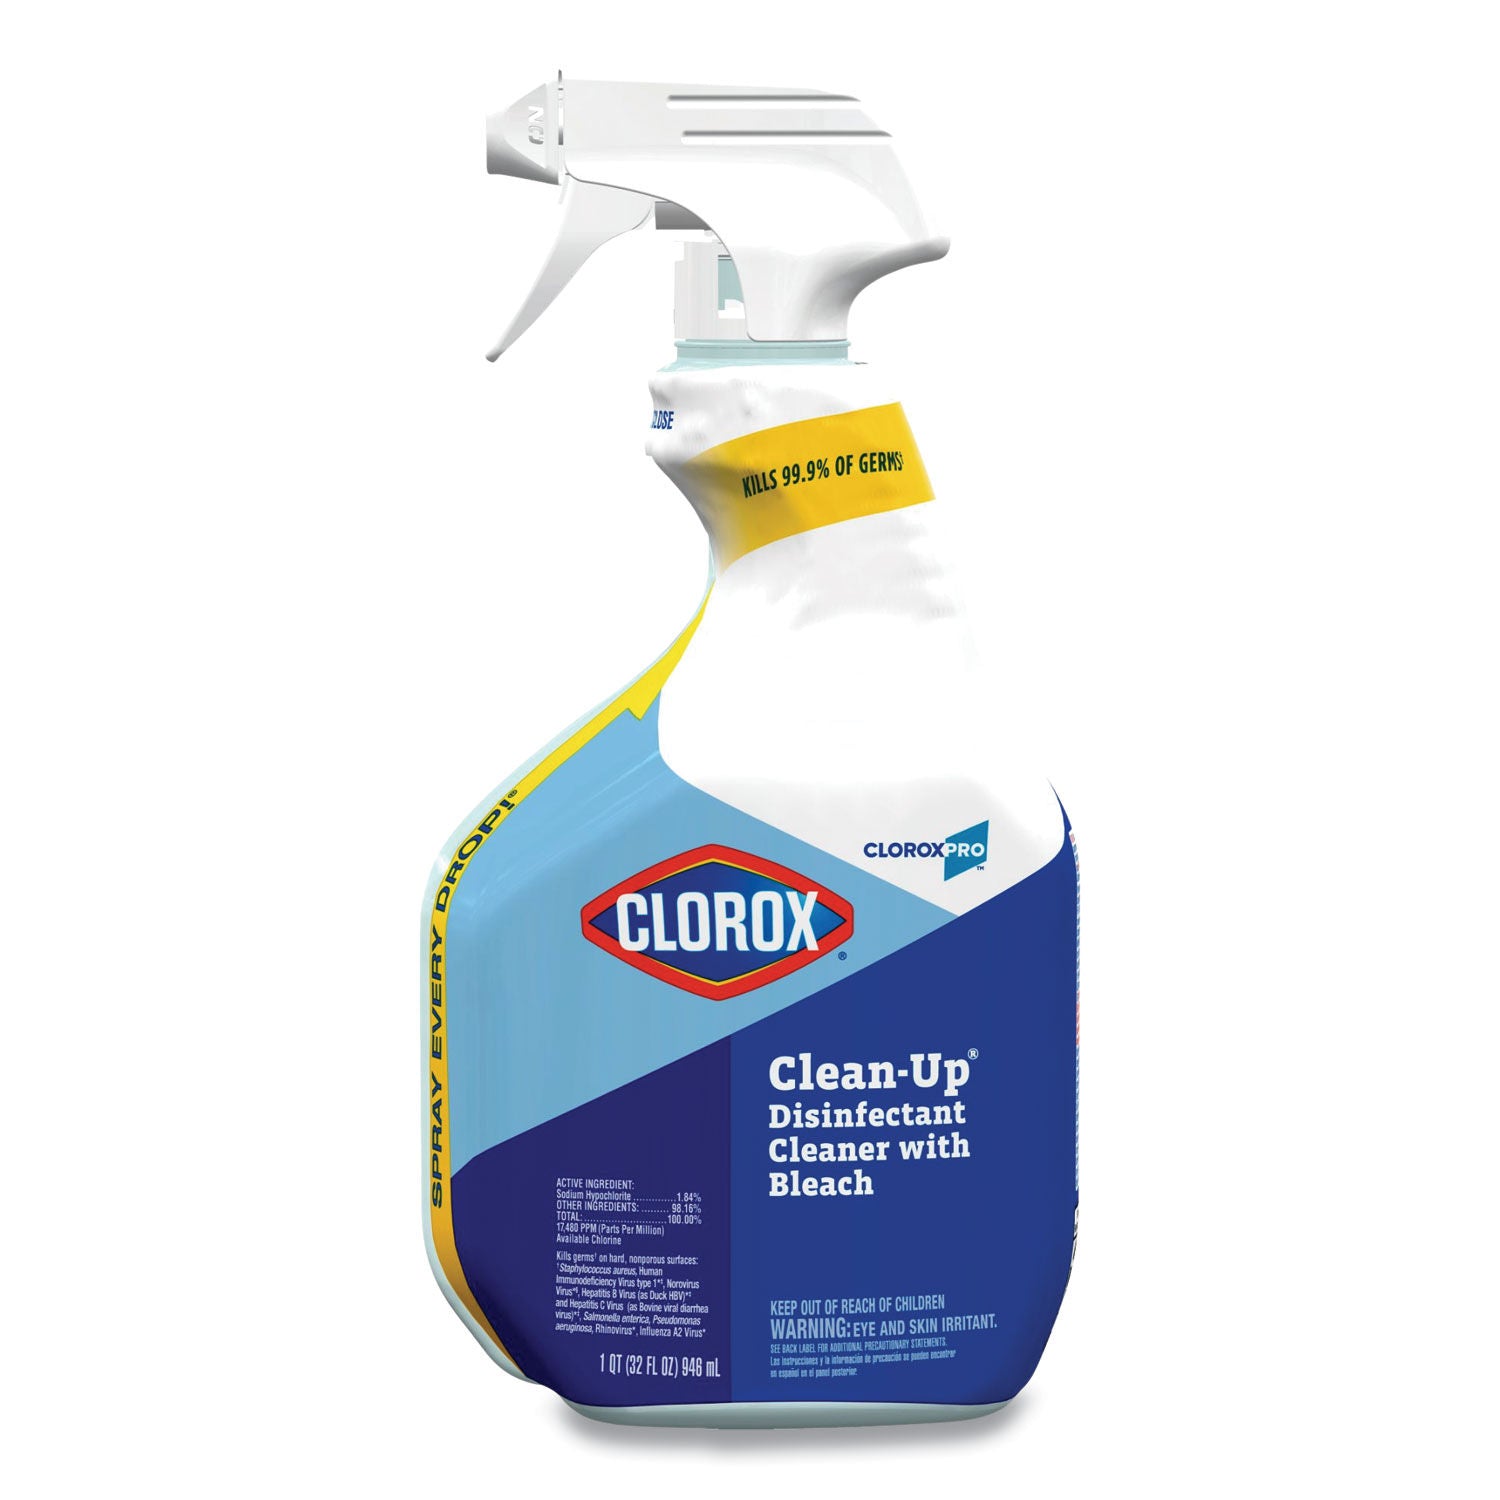 CLOROX CLEAN UP DISINFECTANT CLEANER WITH BLEACH, 32 OZ